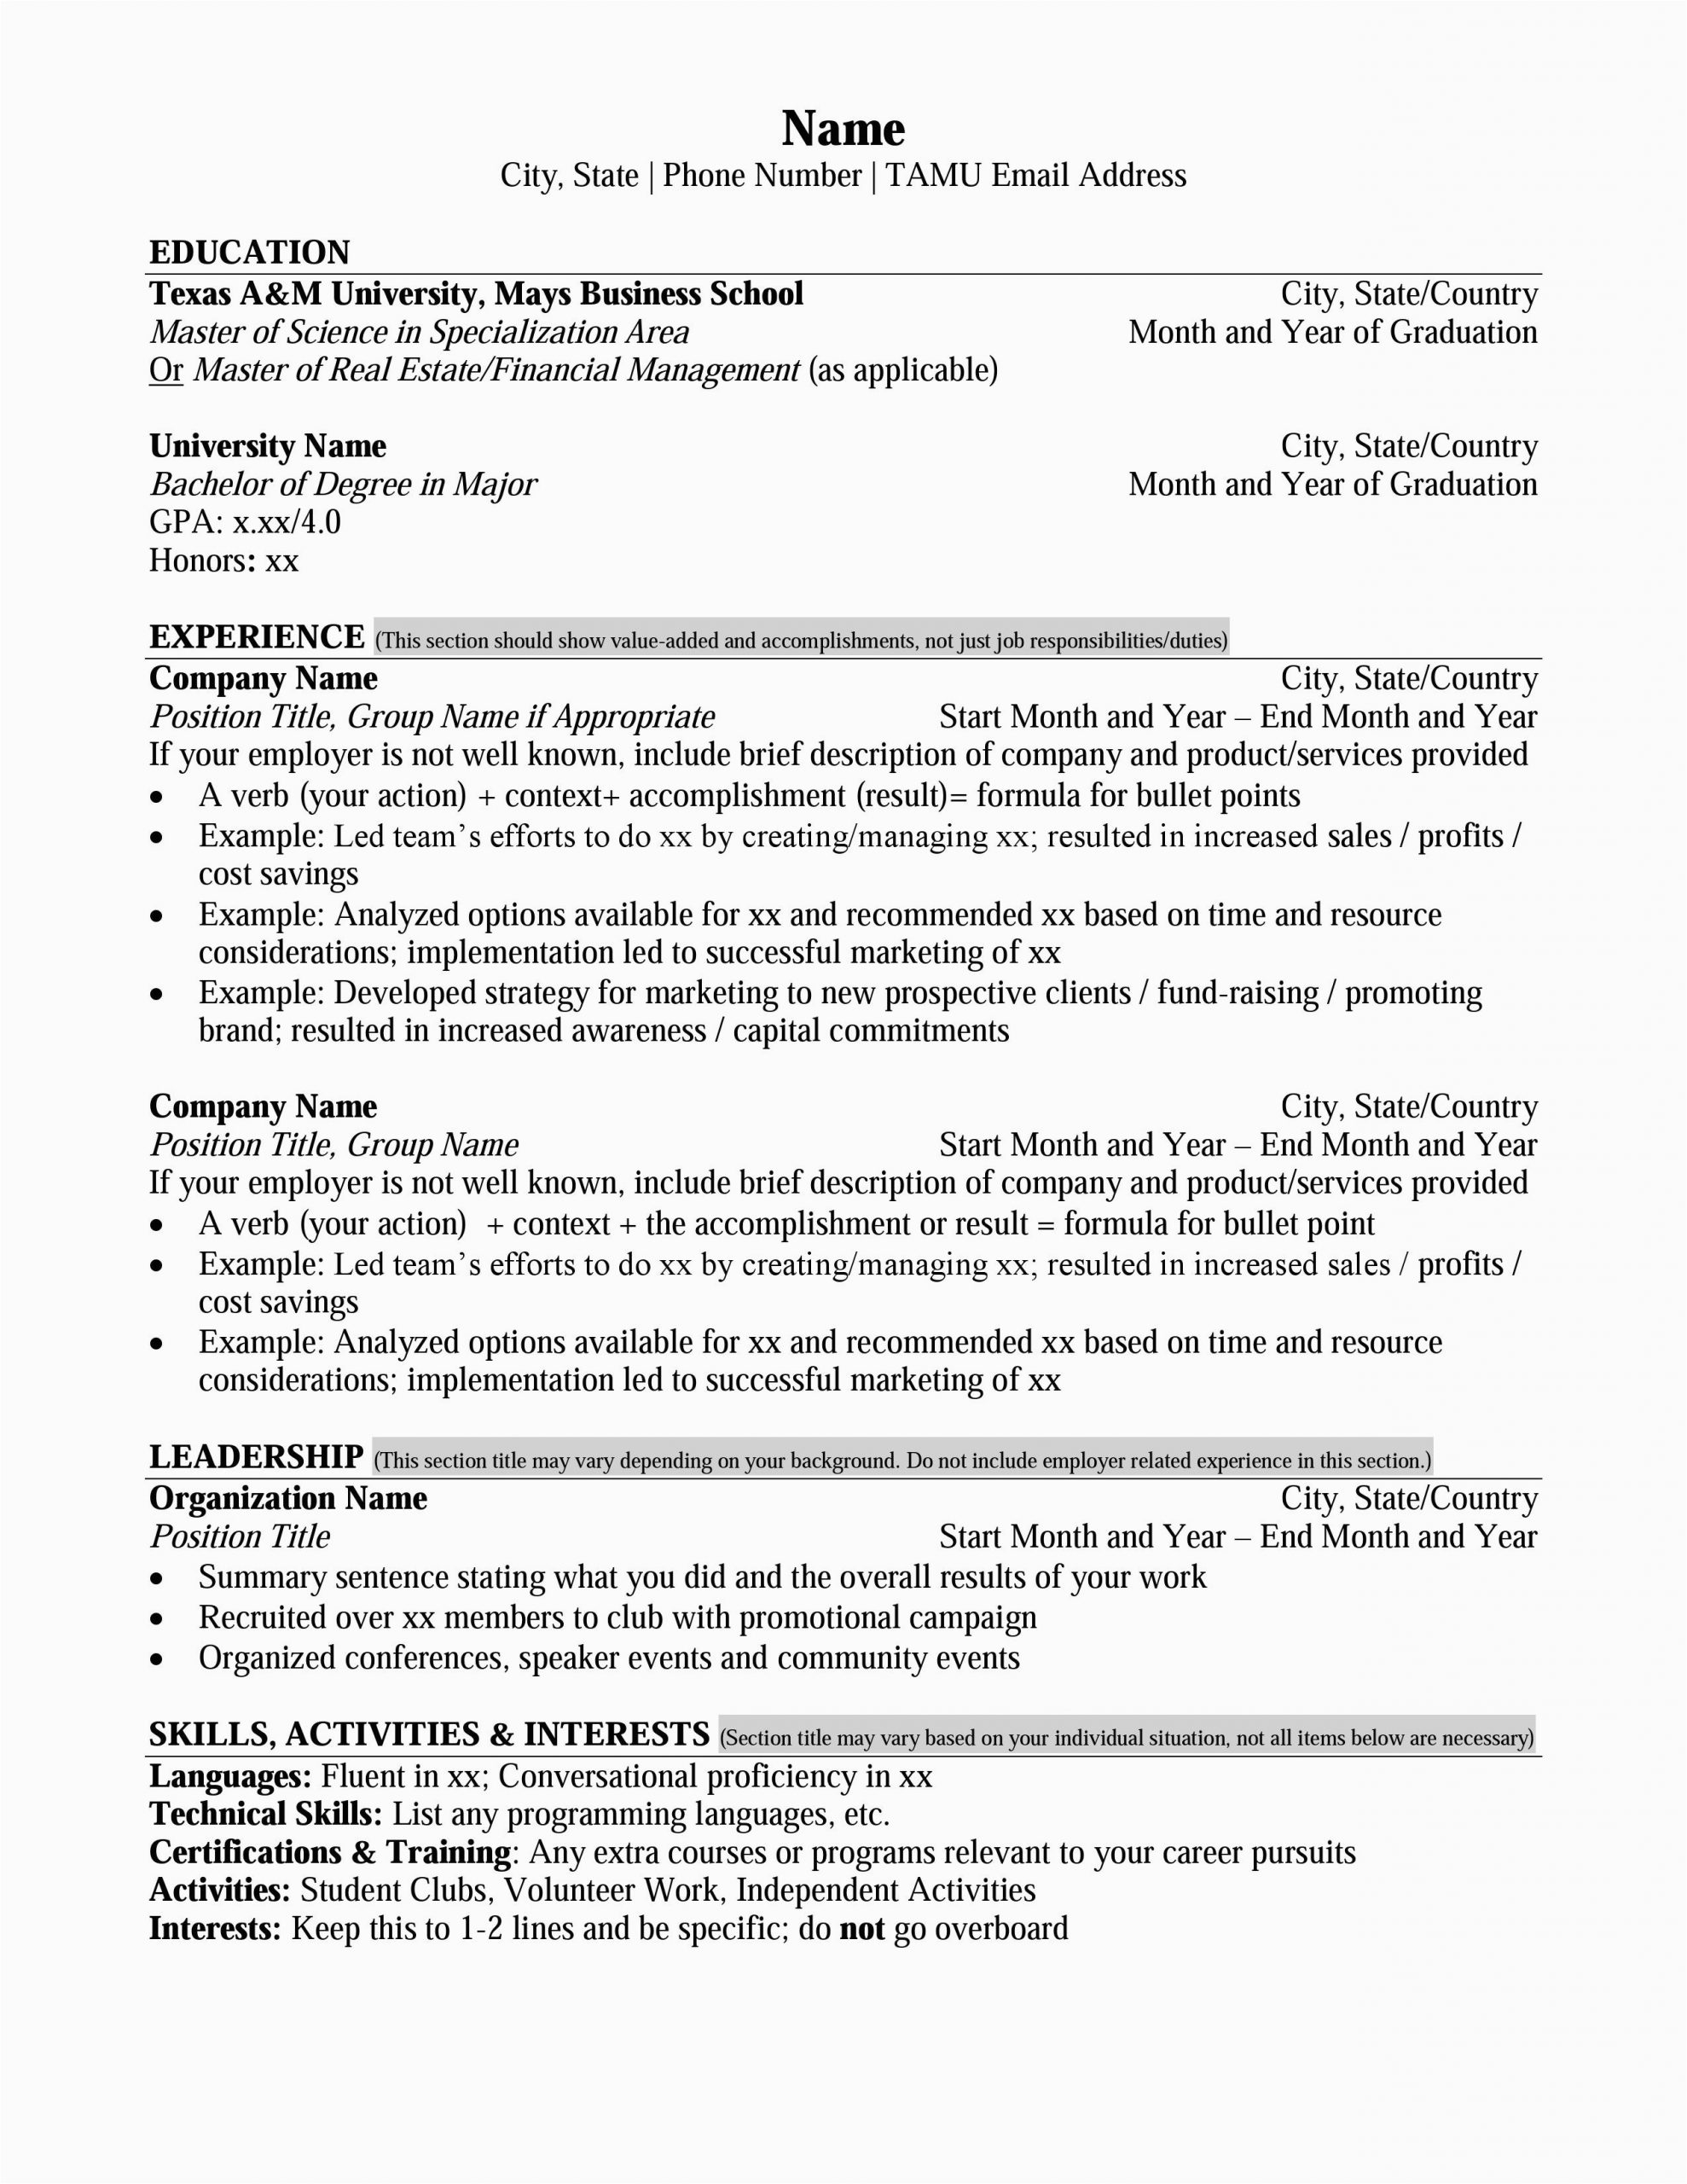 Sample Resume for Applying Ms In Us Mays Masters Resume format – Career Management Center